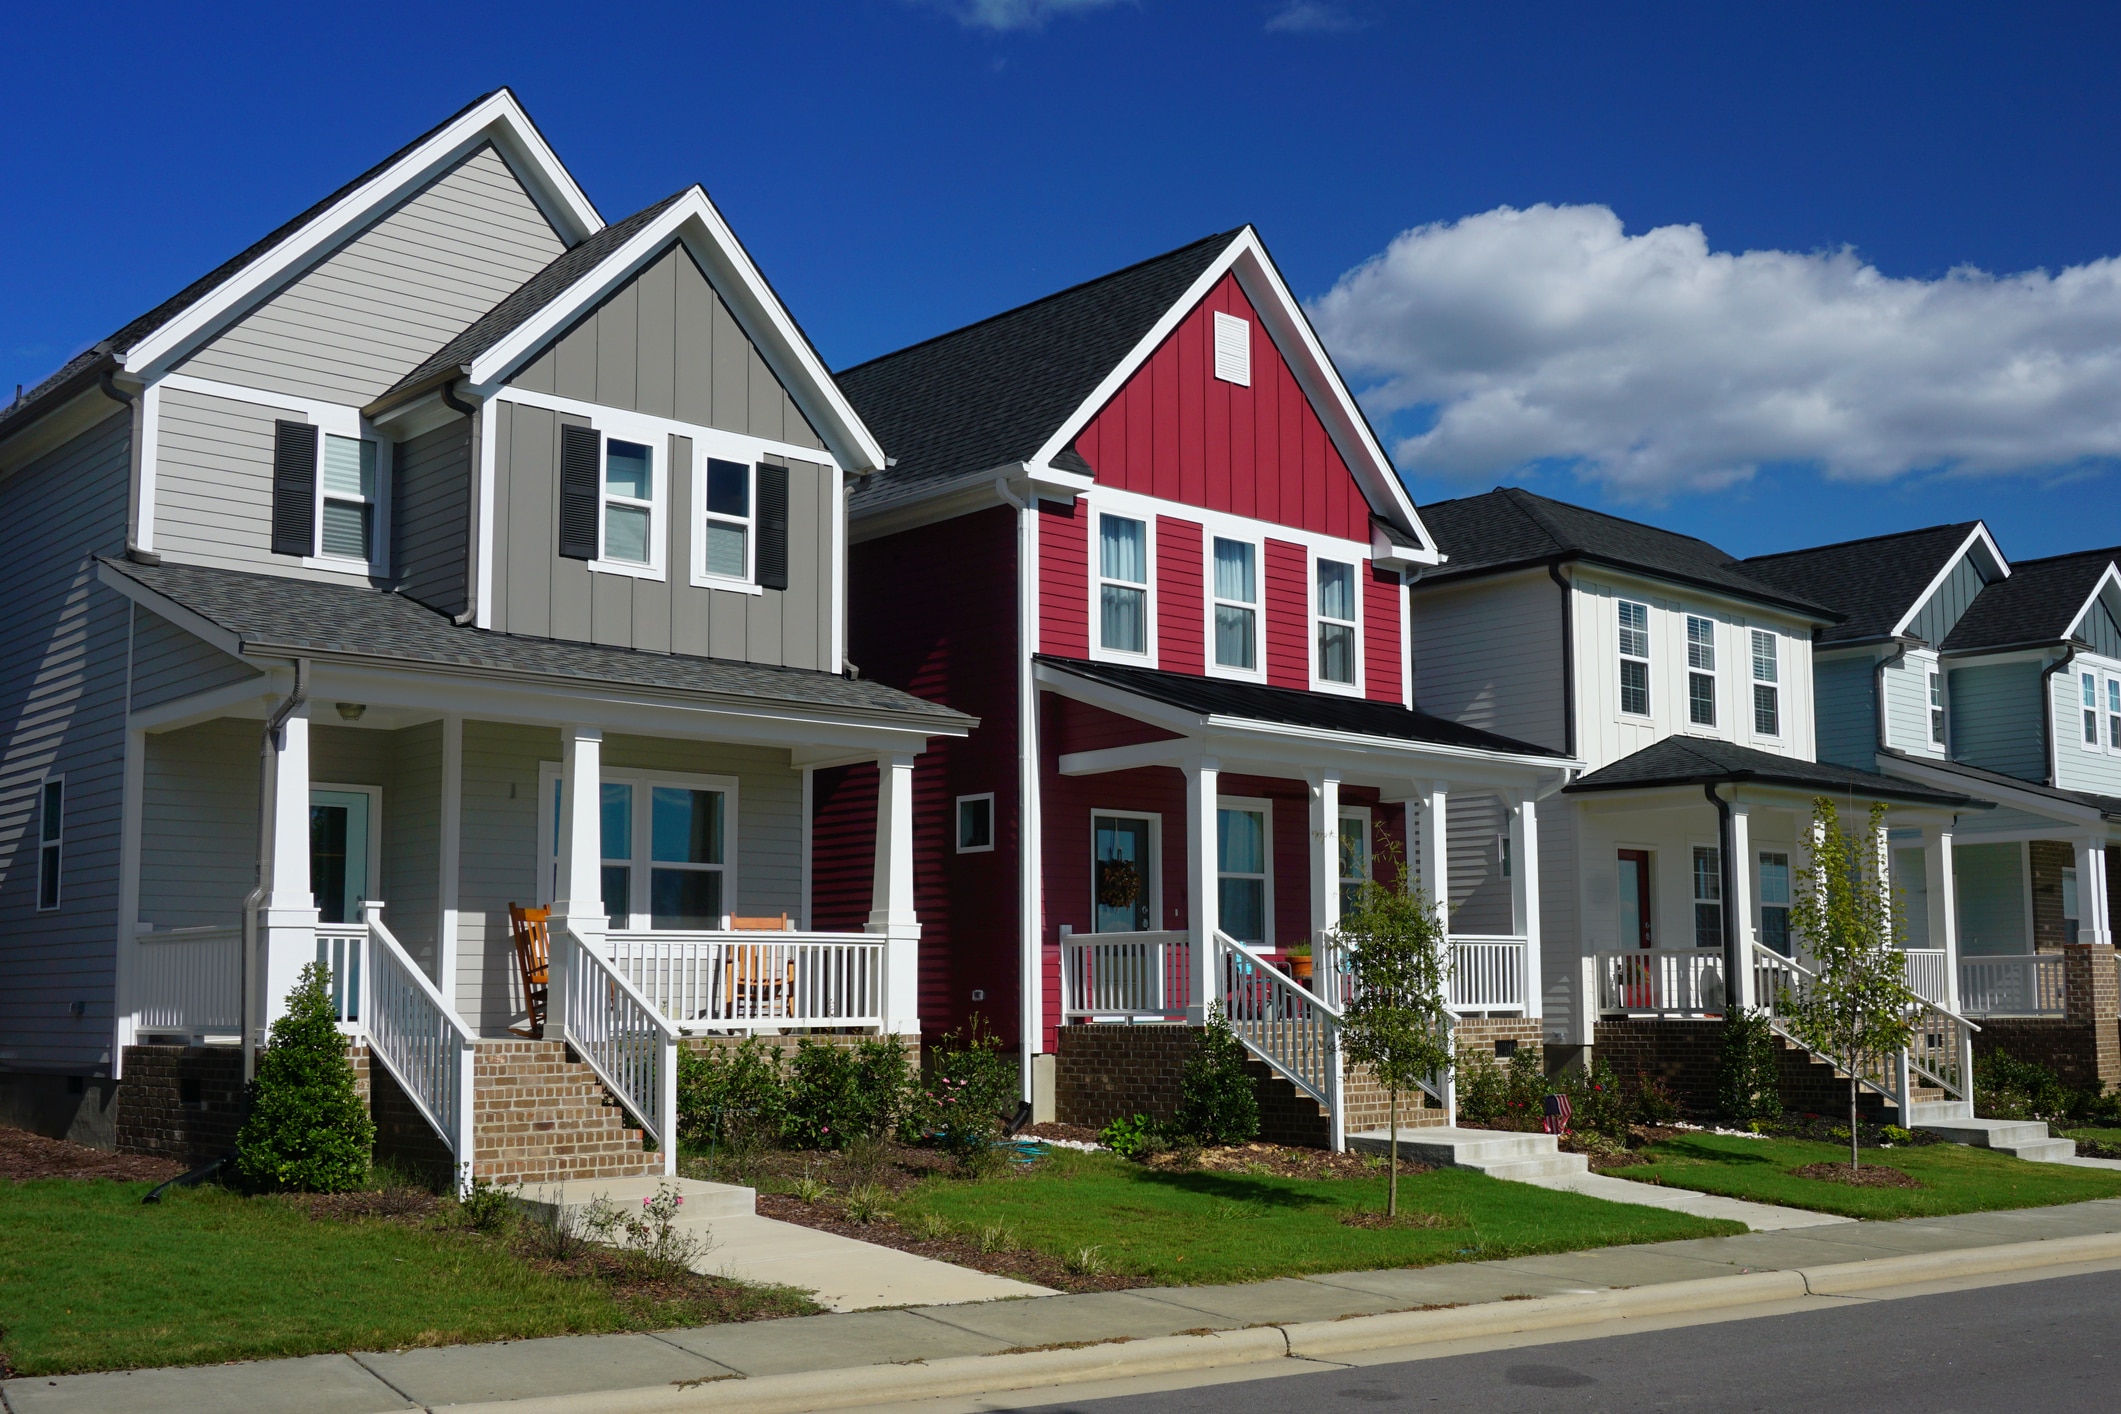 Red and Gray Row Houses in Suburbia stock photo